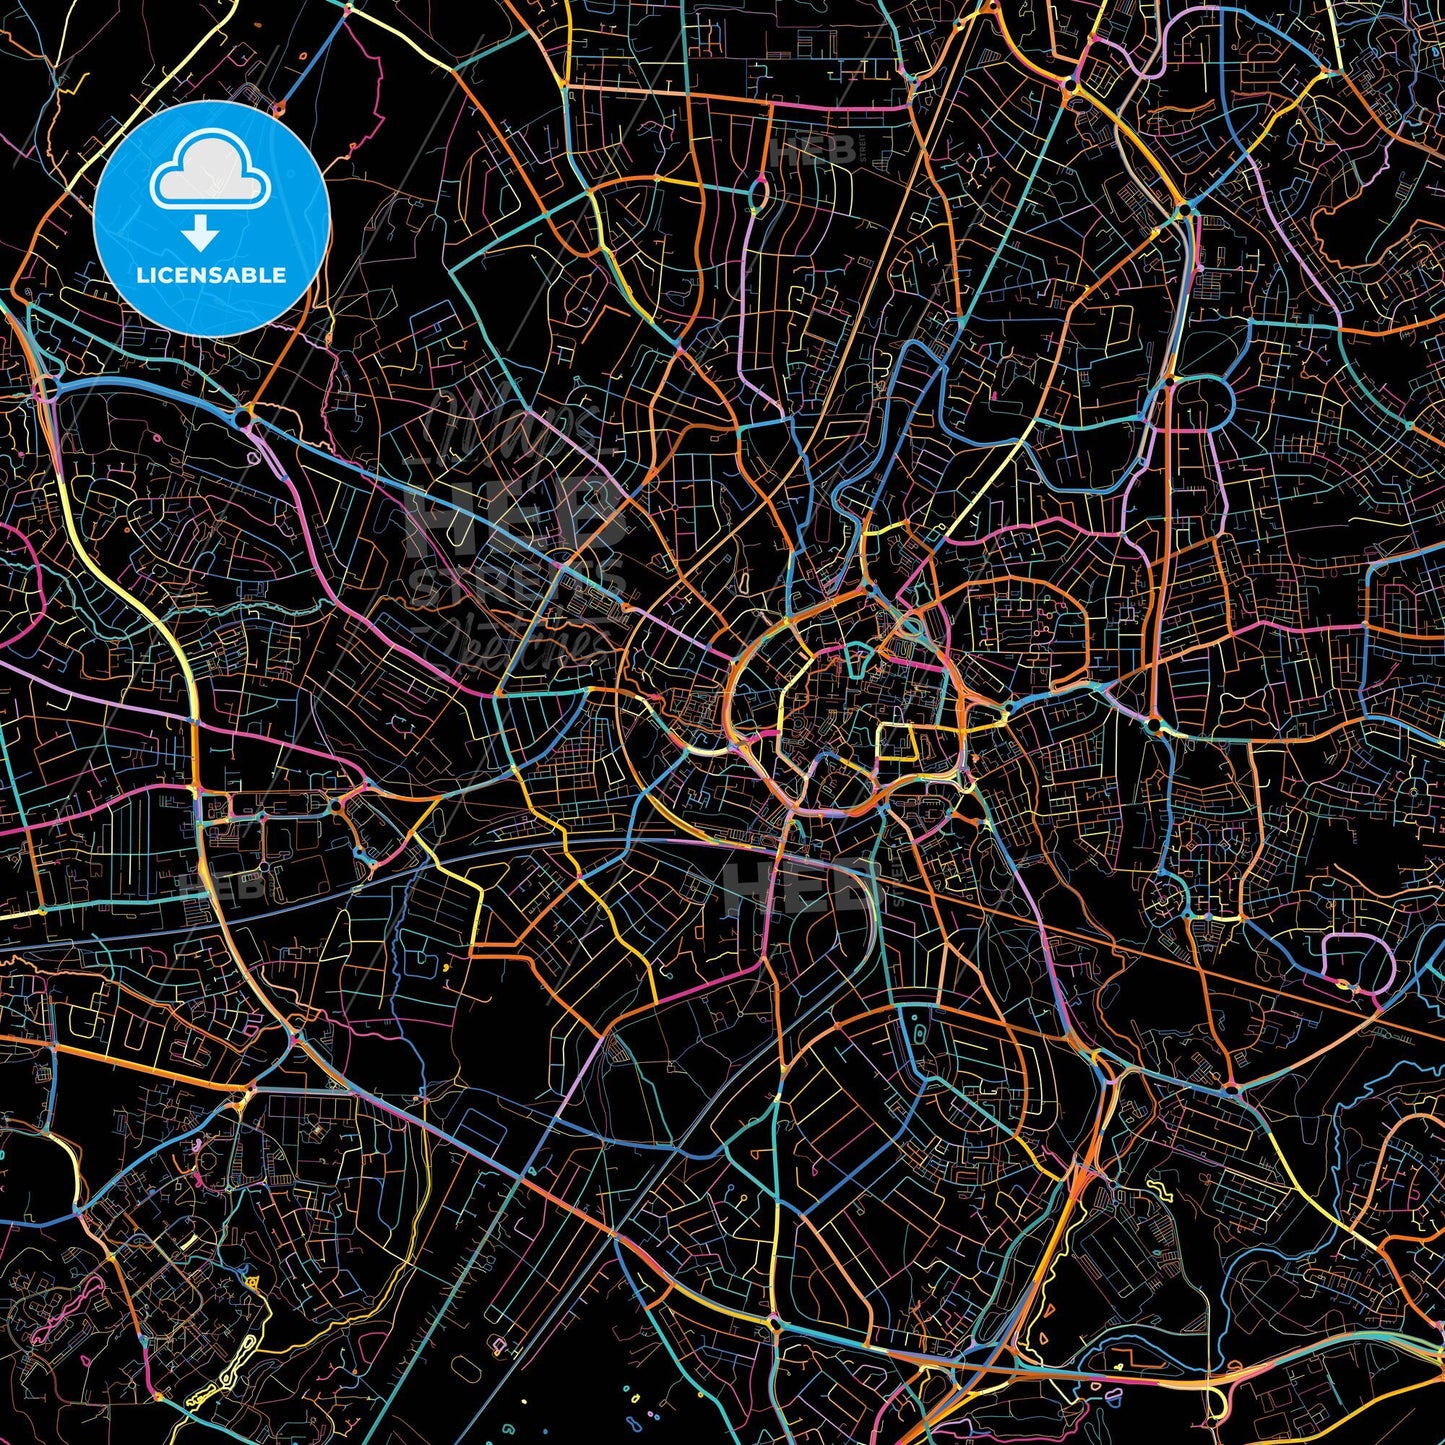 Coventry, West Midlands, England, colorful city map on black background